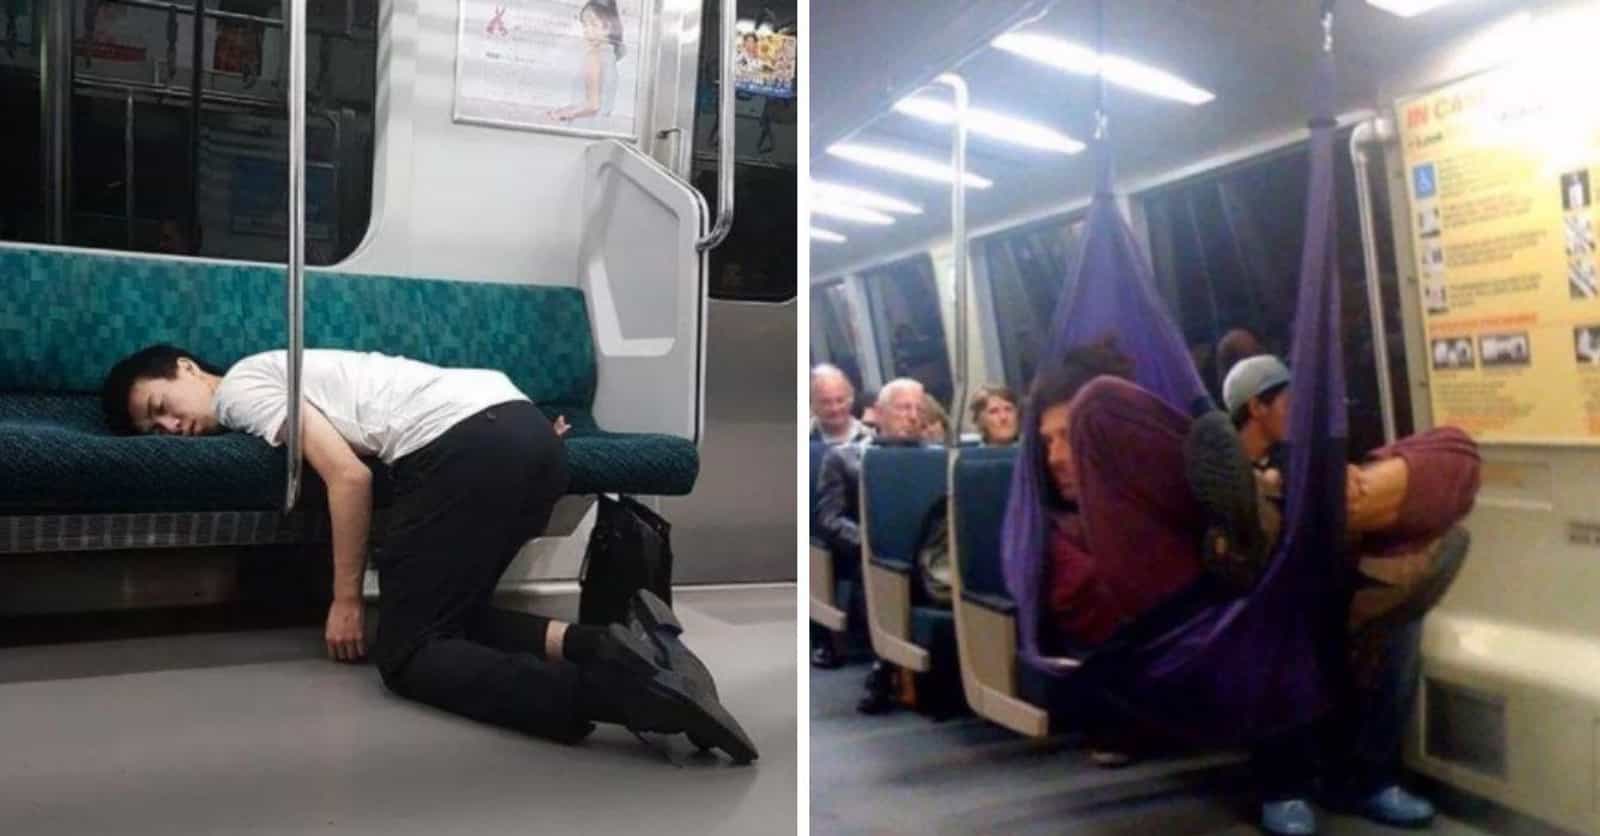 City Subway Creatures Documents The Metro's Weirdest Riders, And It's Both Disturbing And Glorious